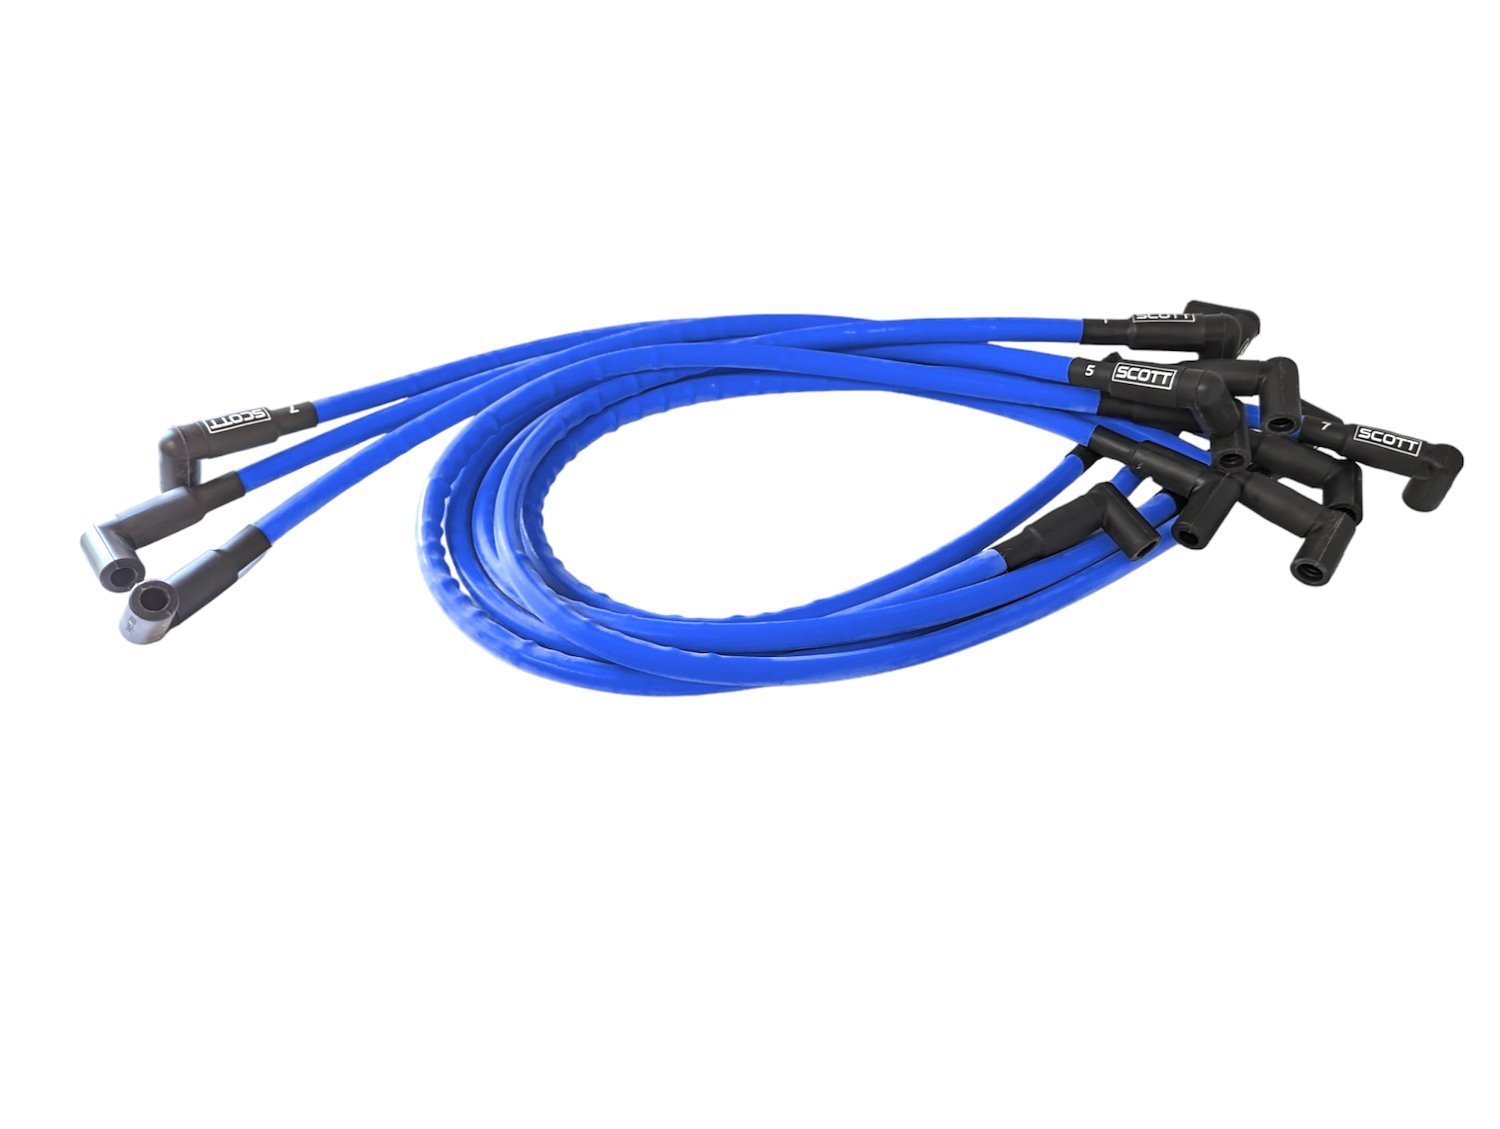 SPW300-CH-516-4 Super Mag Fiberglass-Oversleeved Spark Plug Wire Set for Big Block Chevy Dragster, Under Header [Blue]